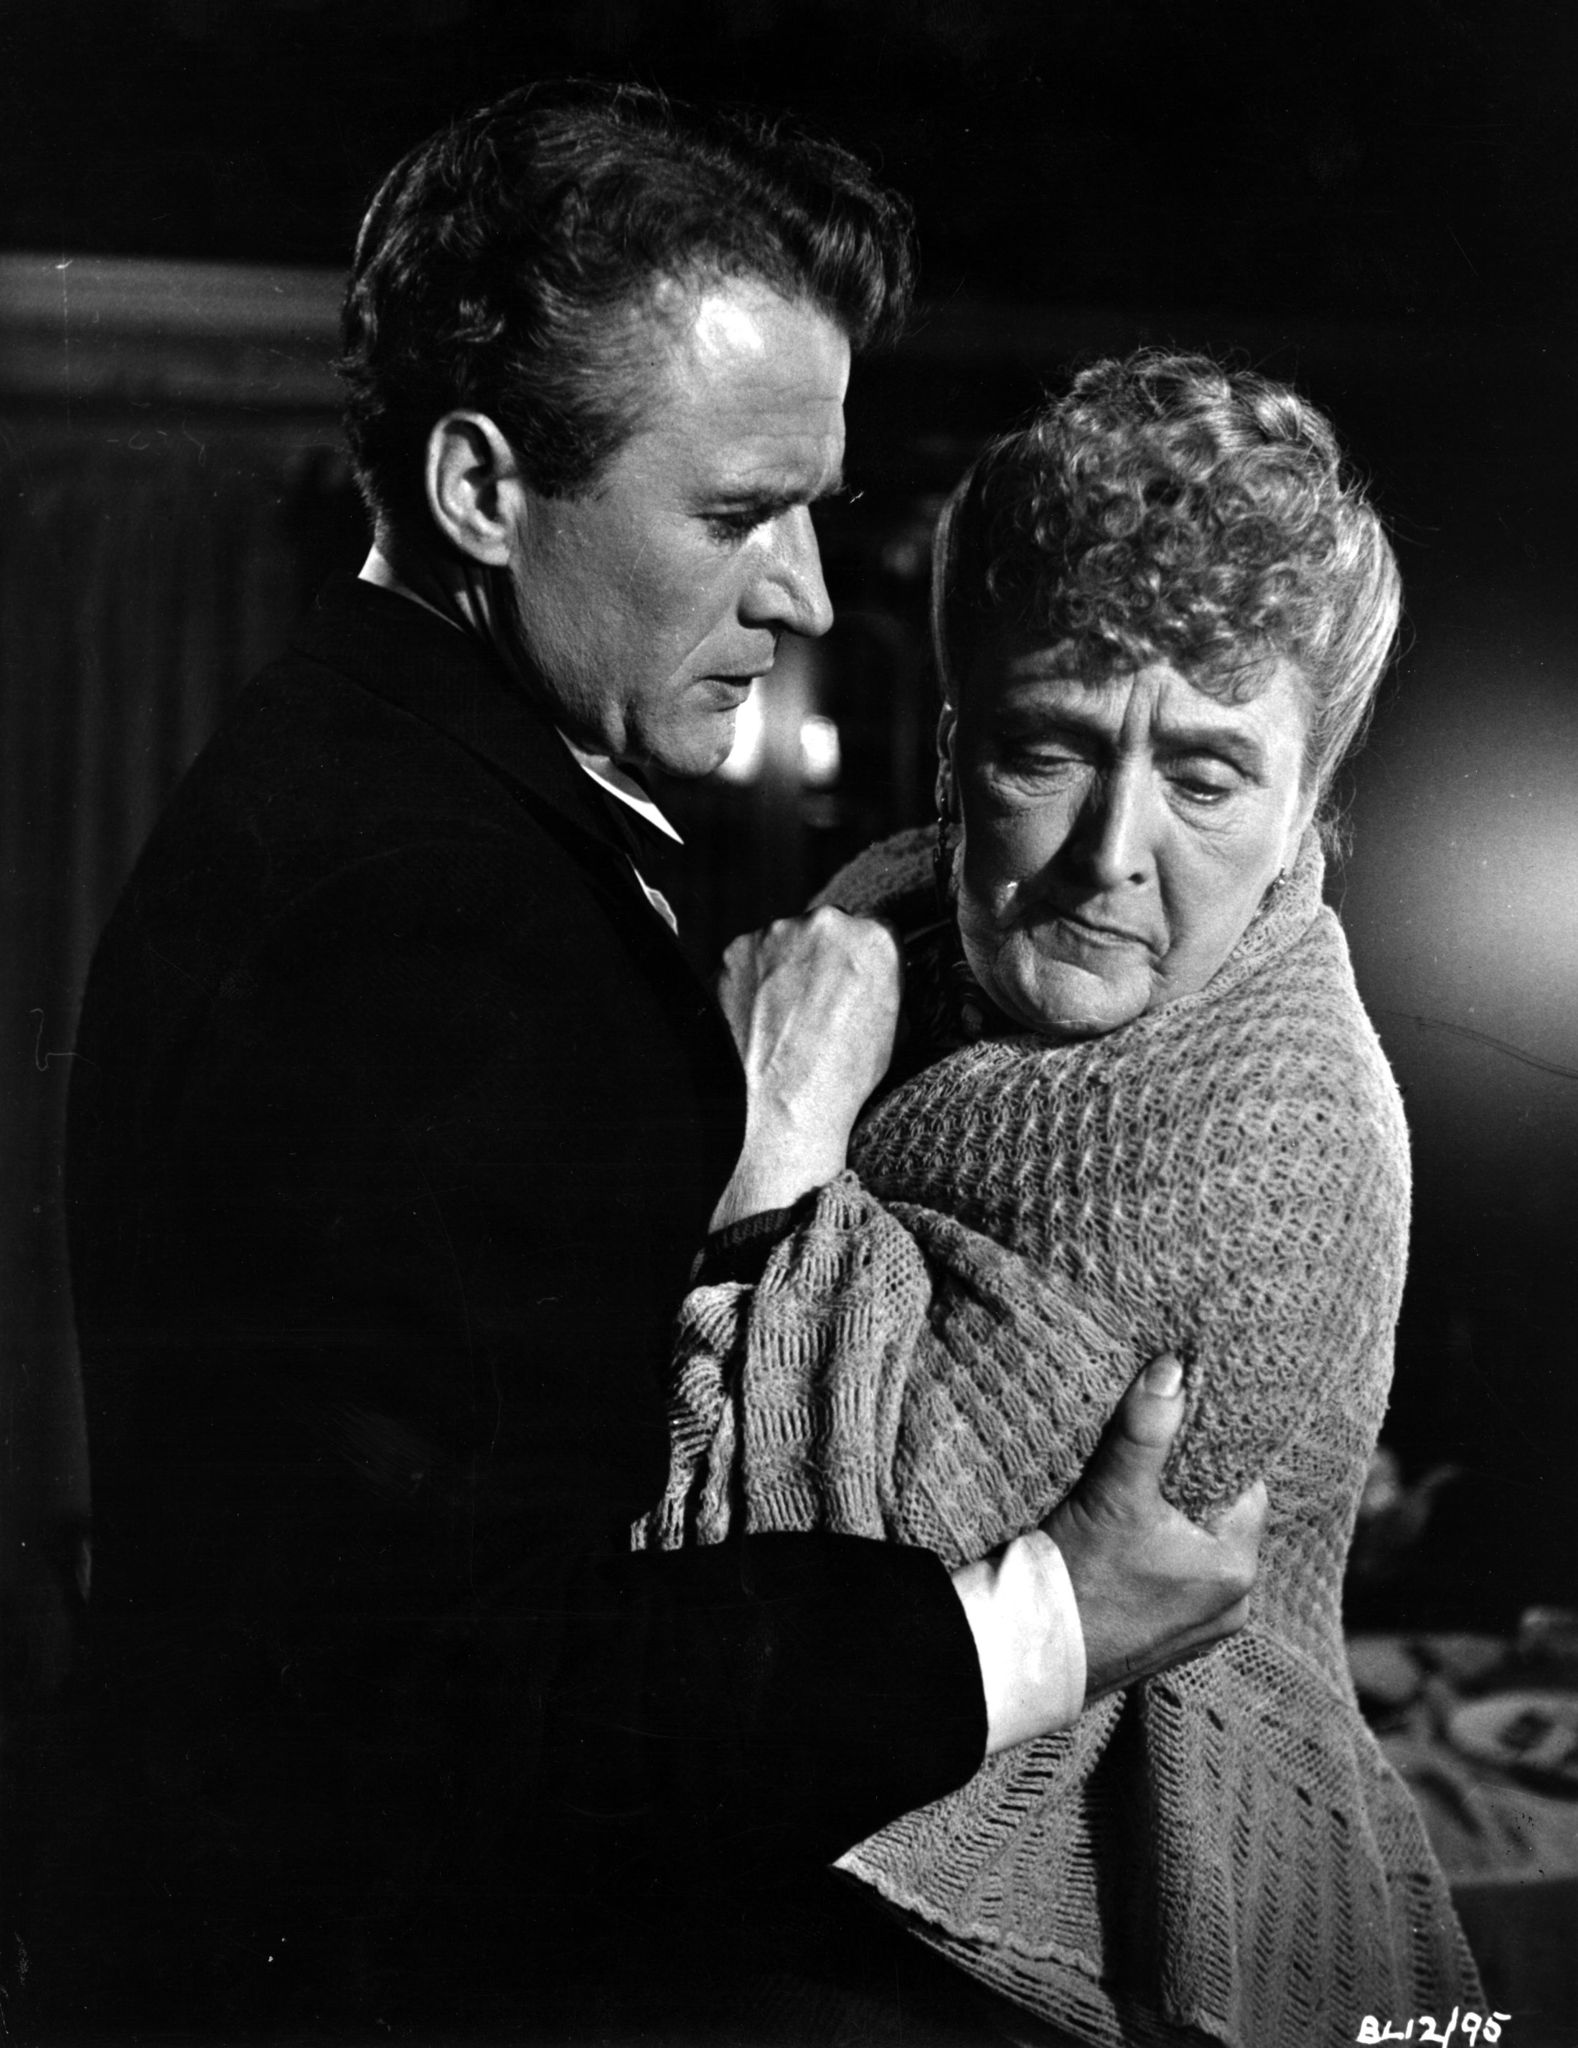 Cyril Cusack and Sybil Thorndike